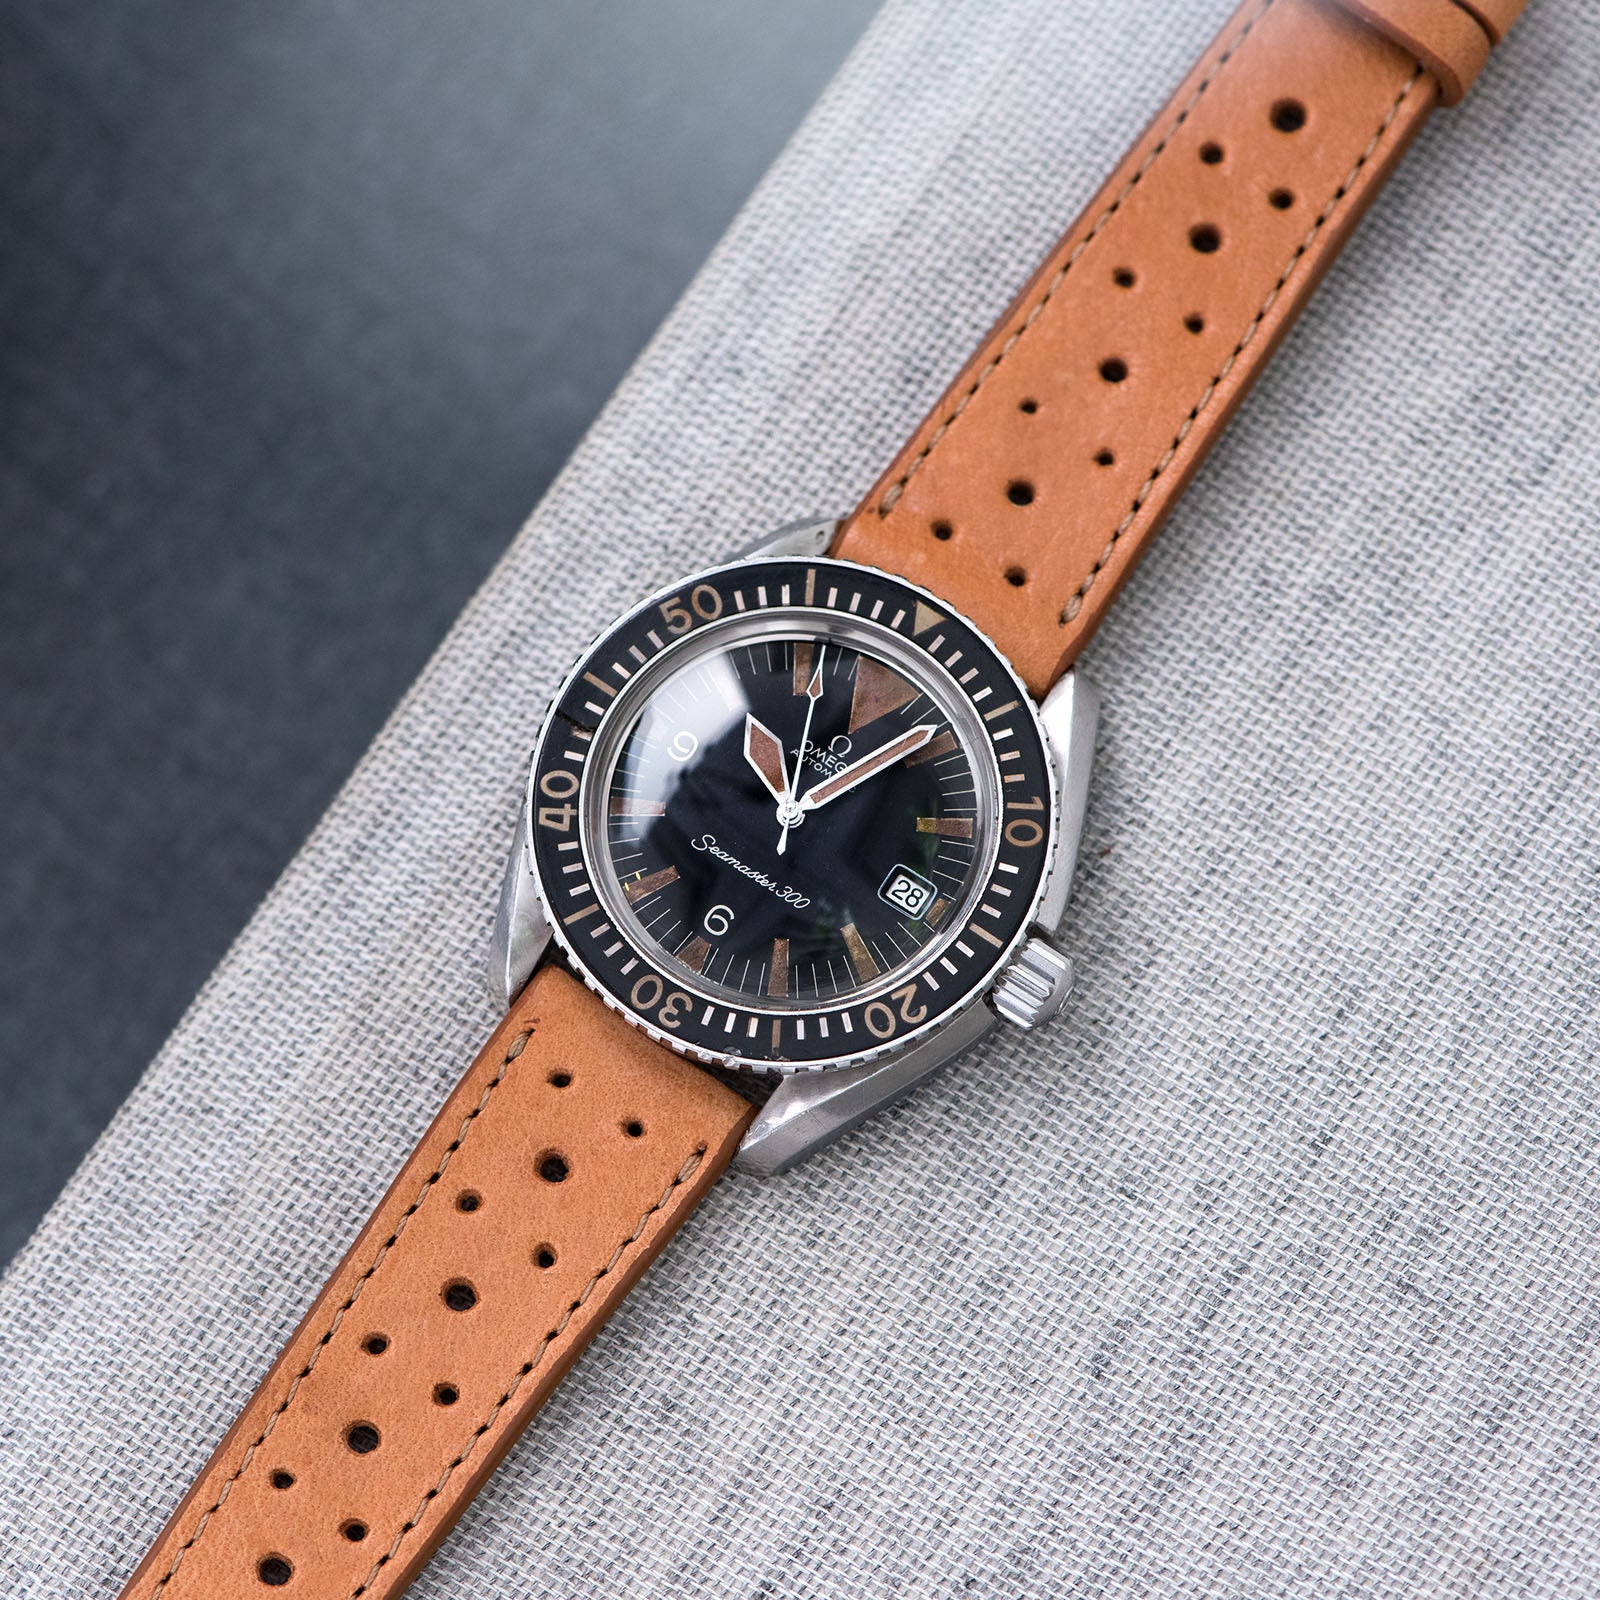 Bulang and Sons_Strap Guide_The omega SM 300 Seamaster_Racing Caramel Brown Leather Watch Strap